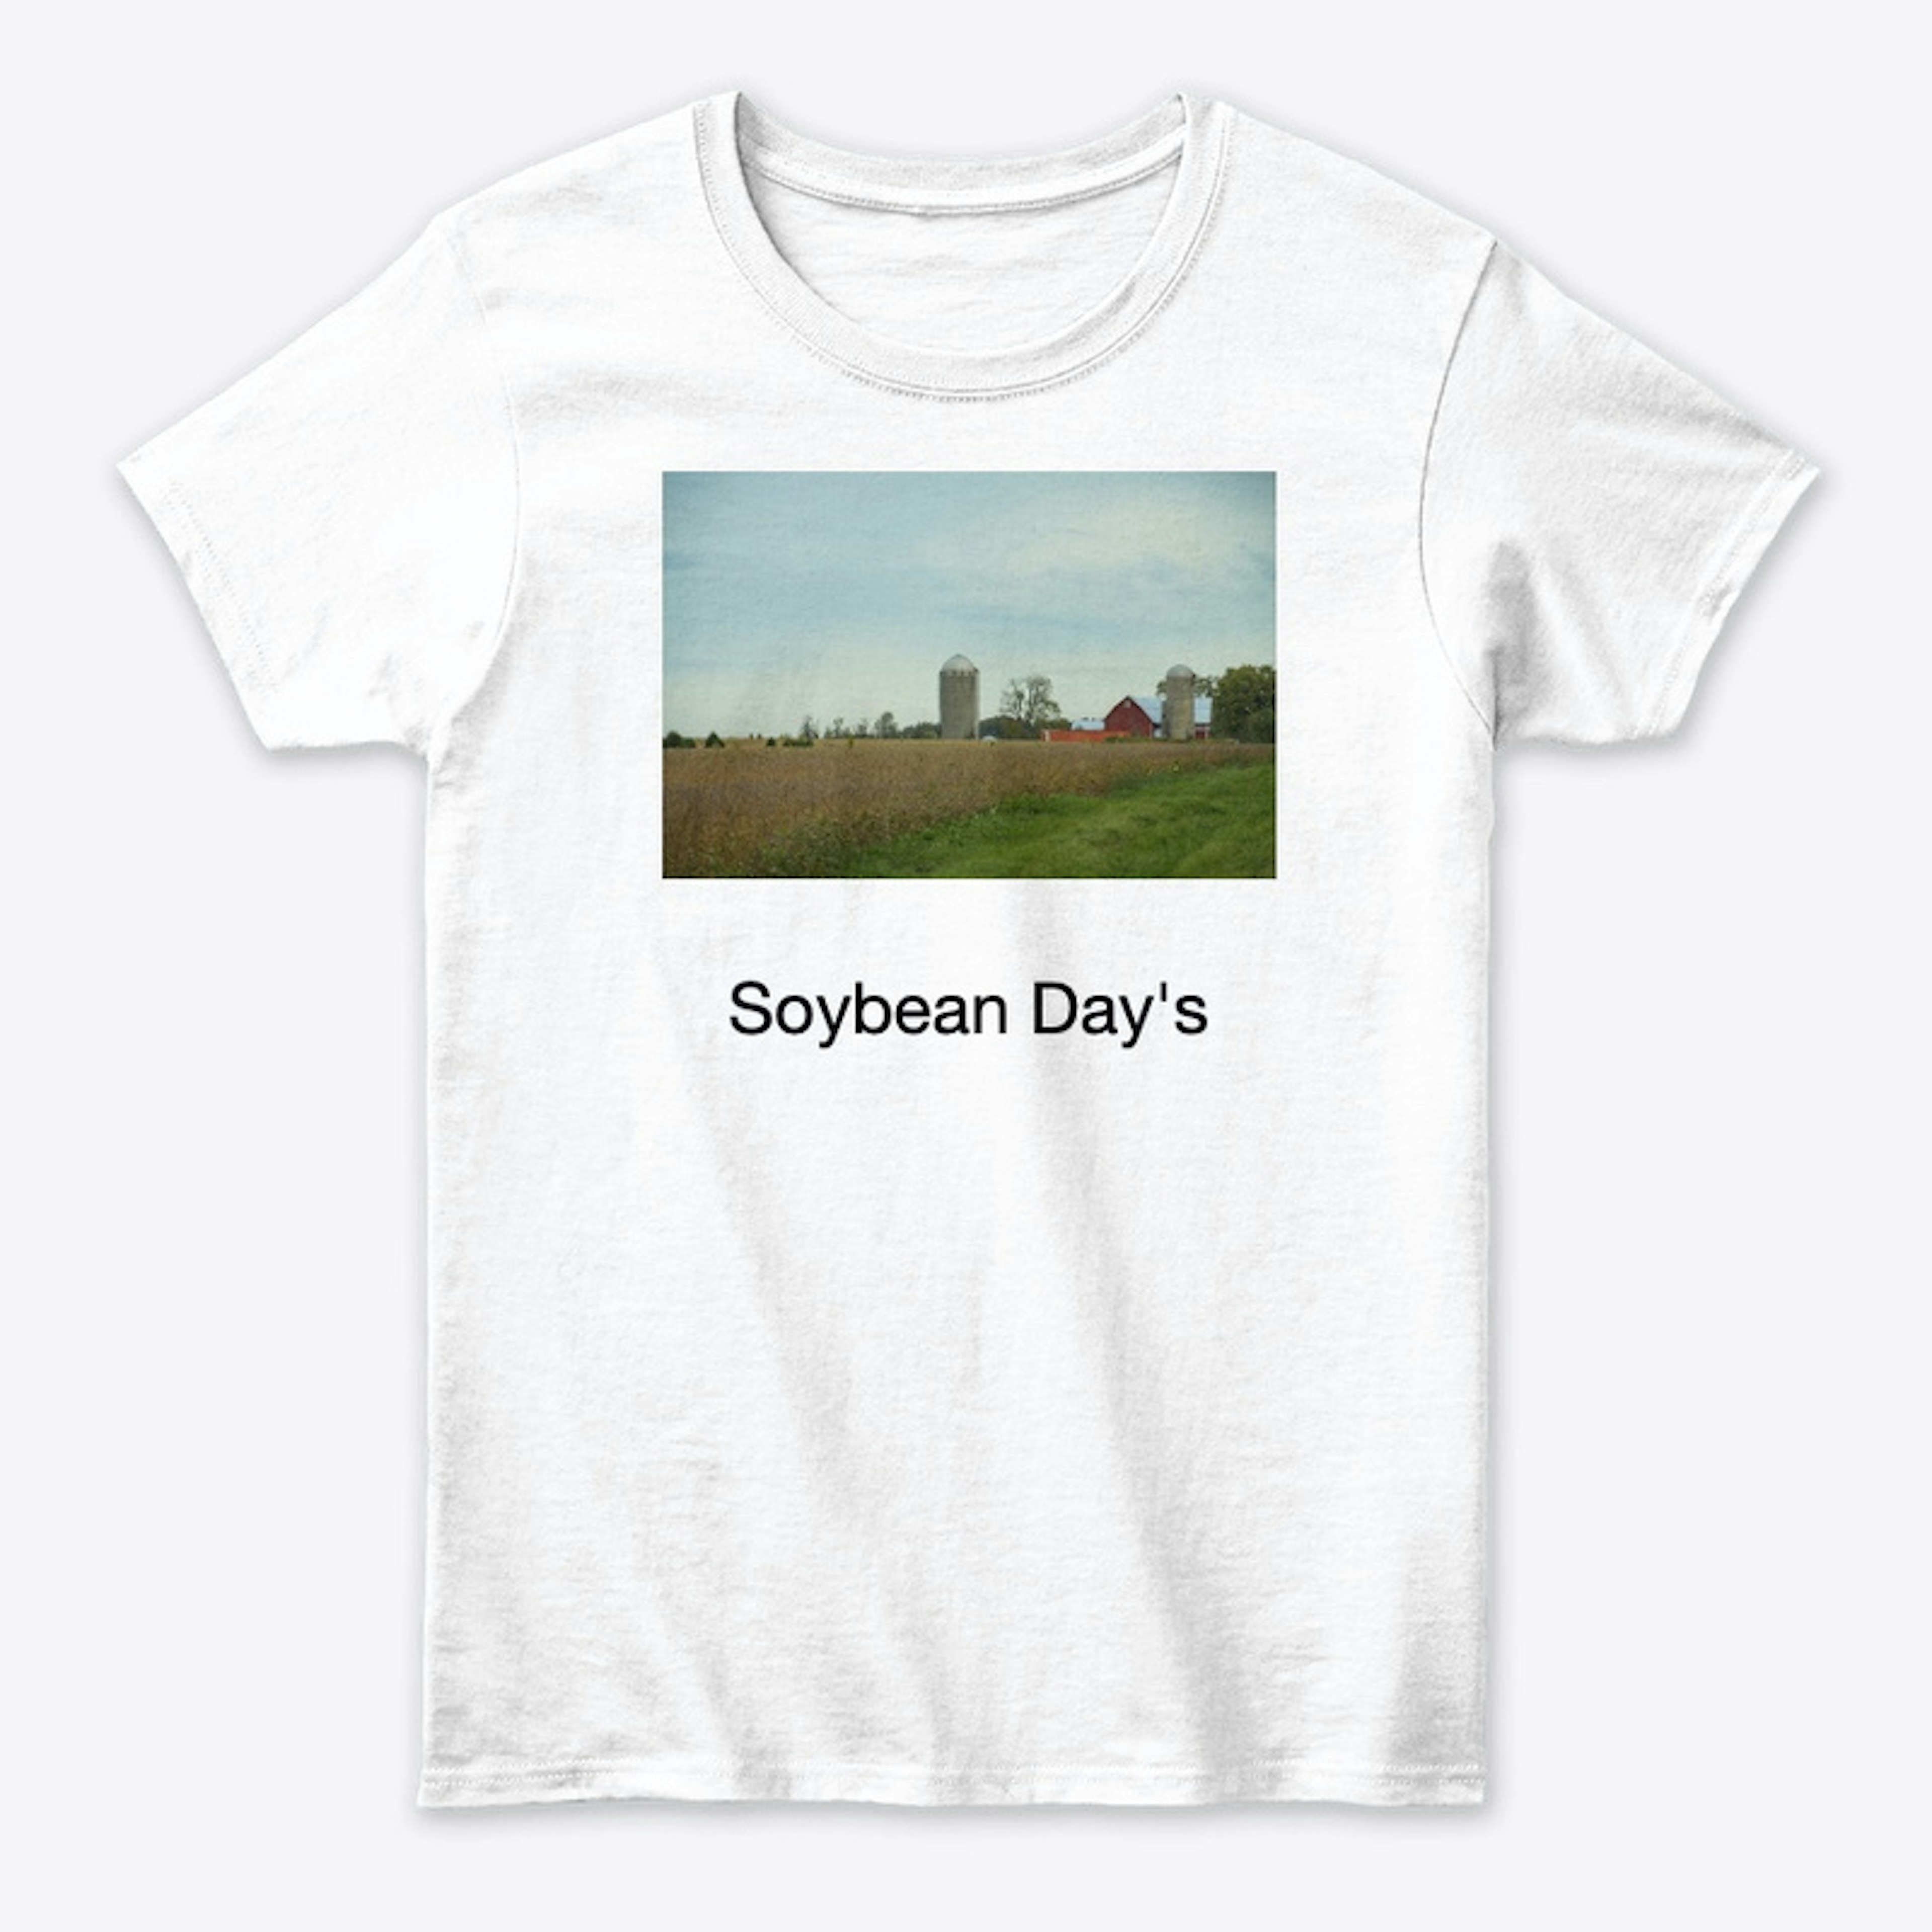 Soybean Day's